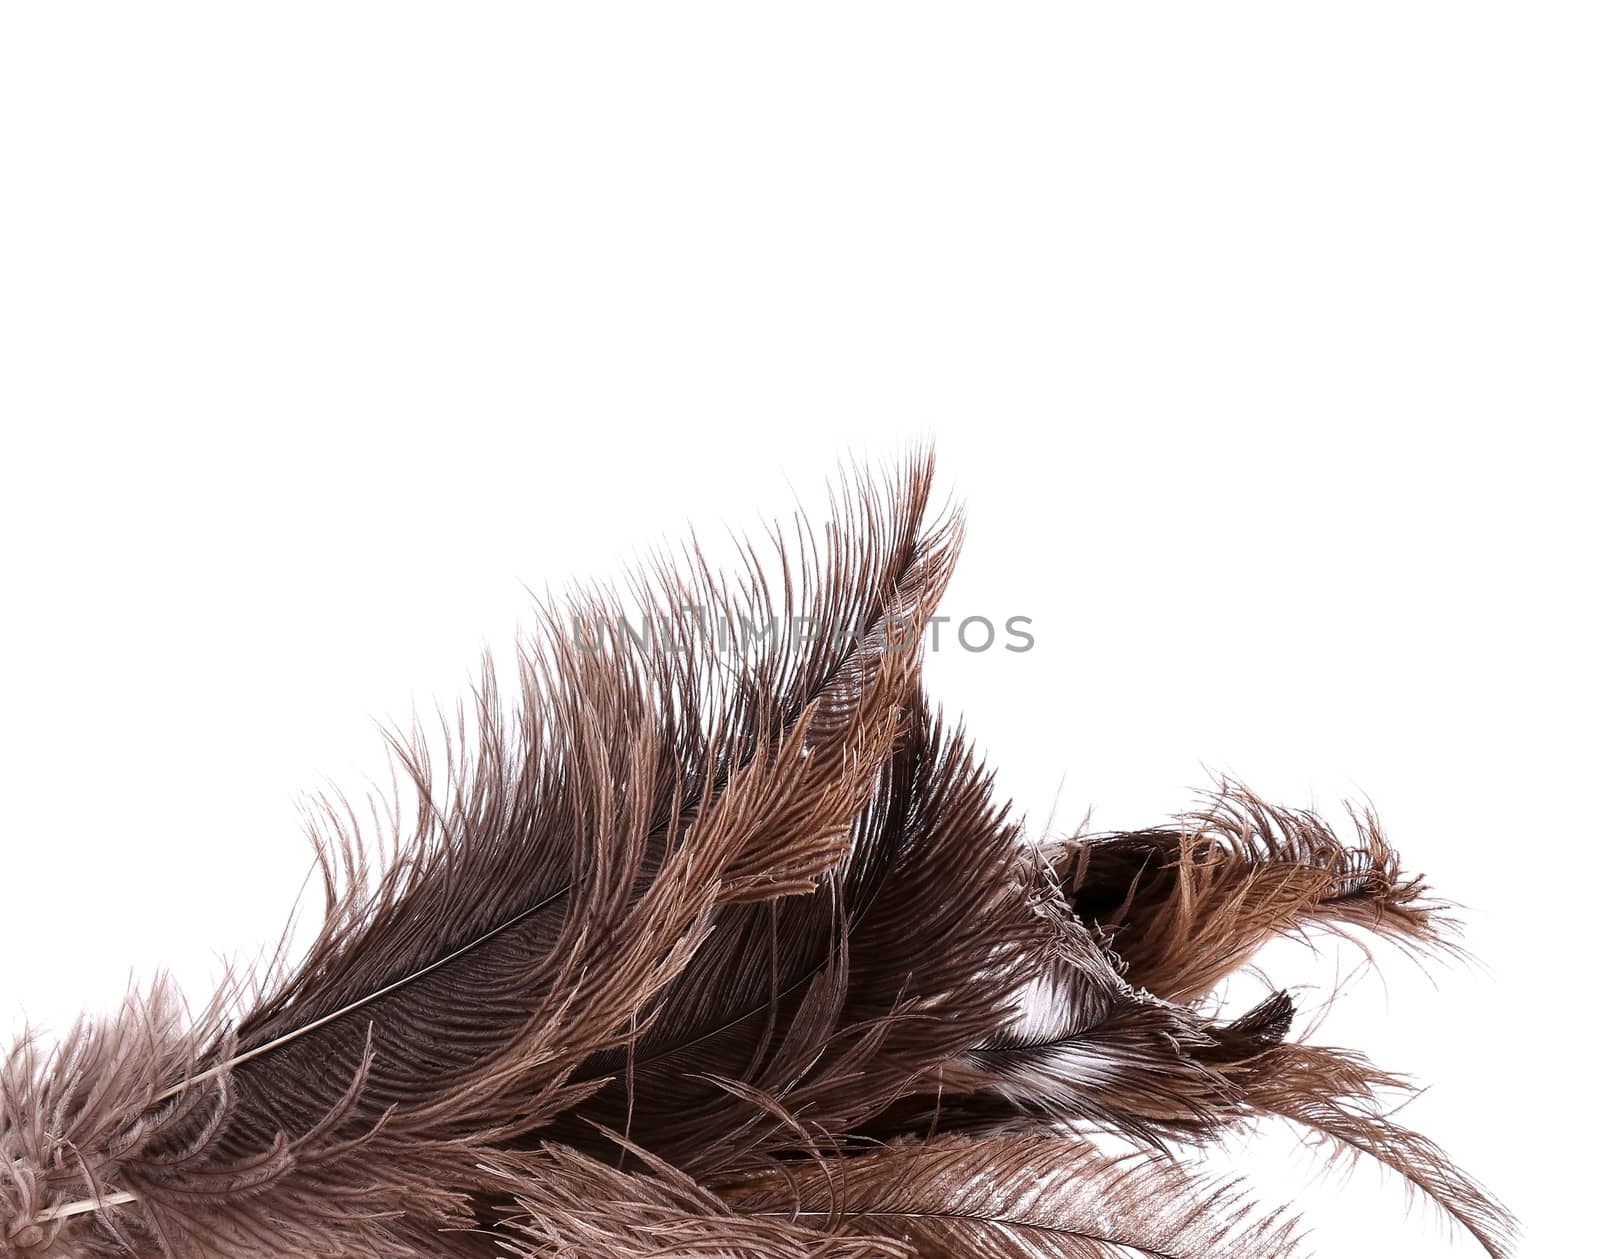 Brush ostrich feather close-up by indigolotos